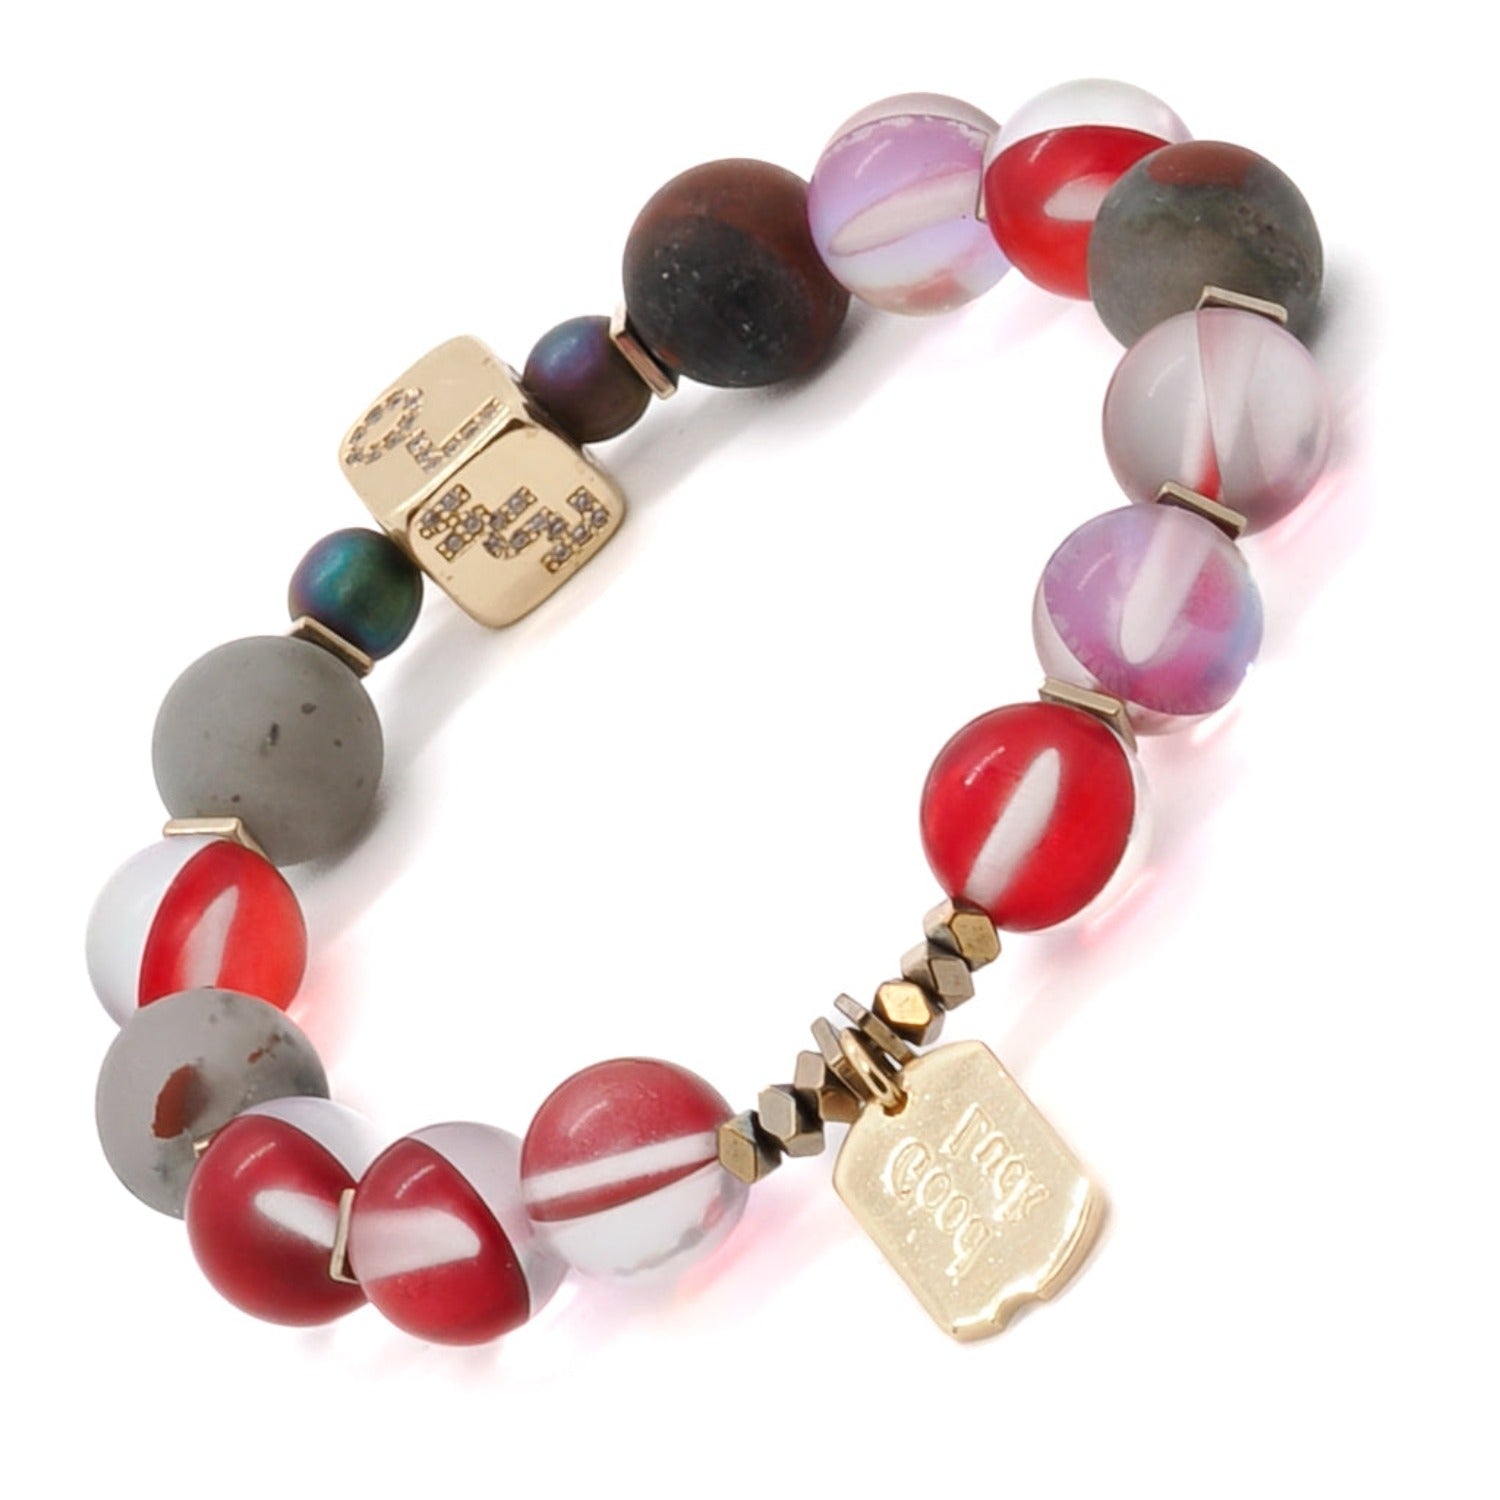 Explore the symbolism of good fortune with the Red & Gold Good Luck Bracelet, featuring red color cat eye stone beads and gold accents.